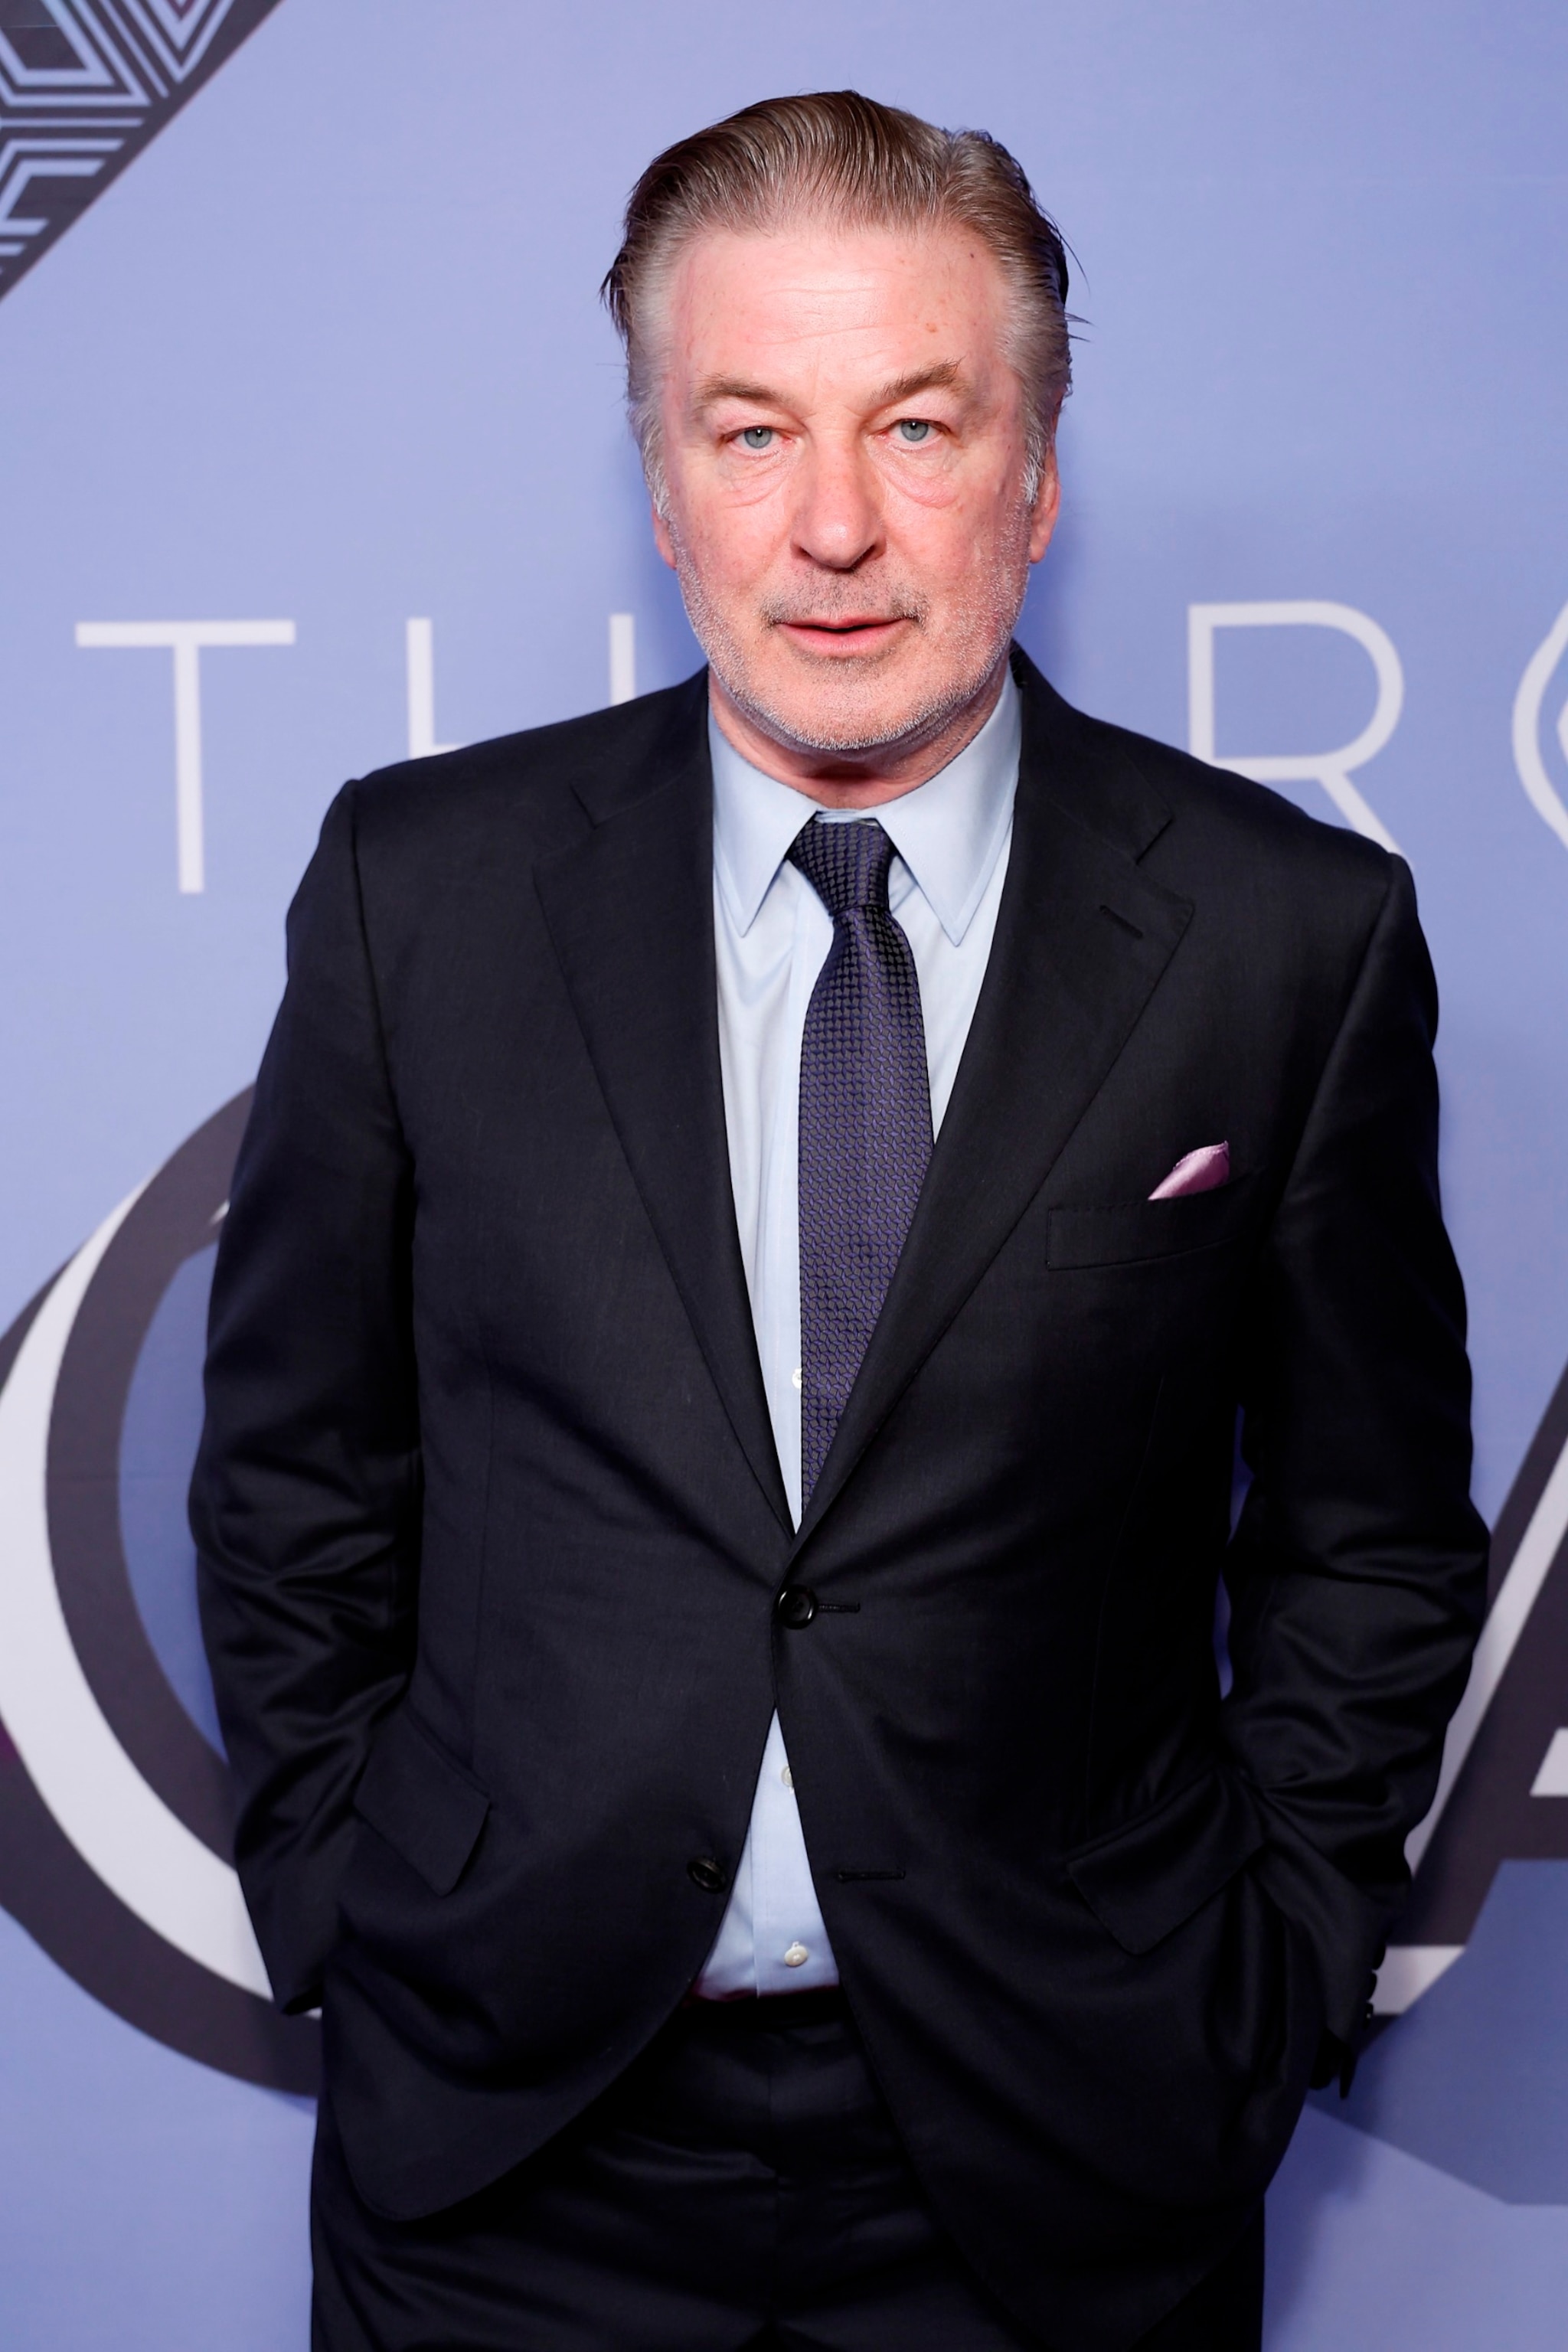 PHOTO: Alec Baldwin attends The Roundabout Gala 2023 at The Ziegfeld Ballroom in New York City, March 06, 2023.